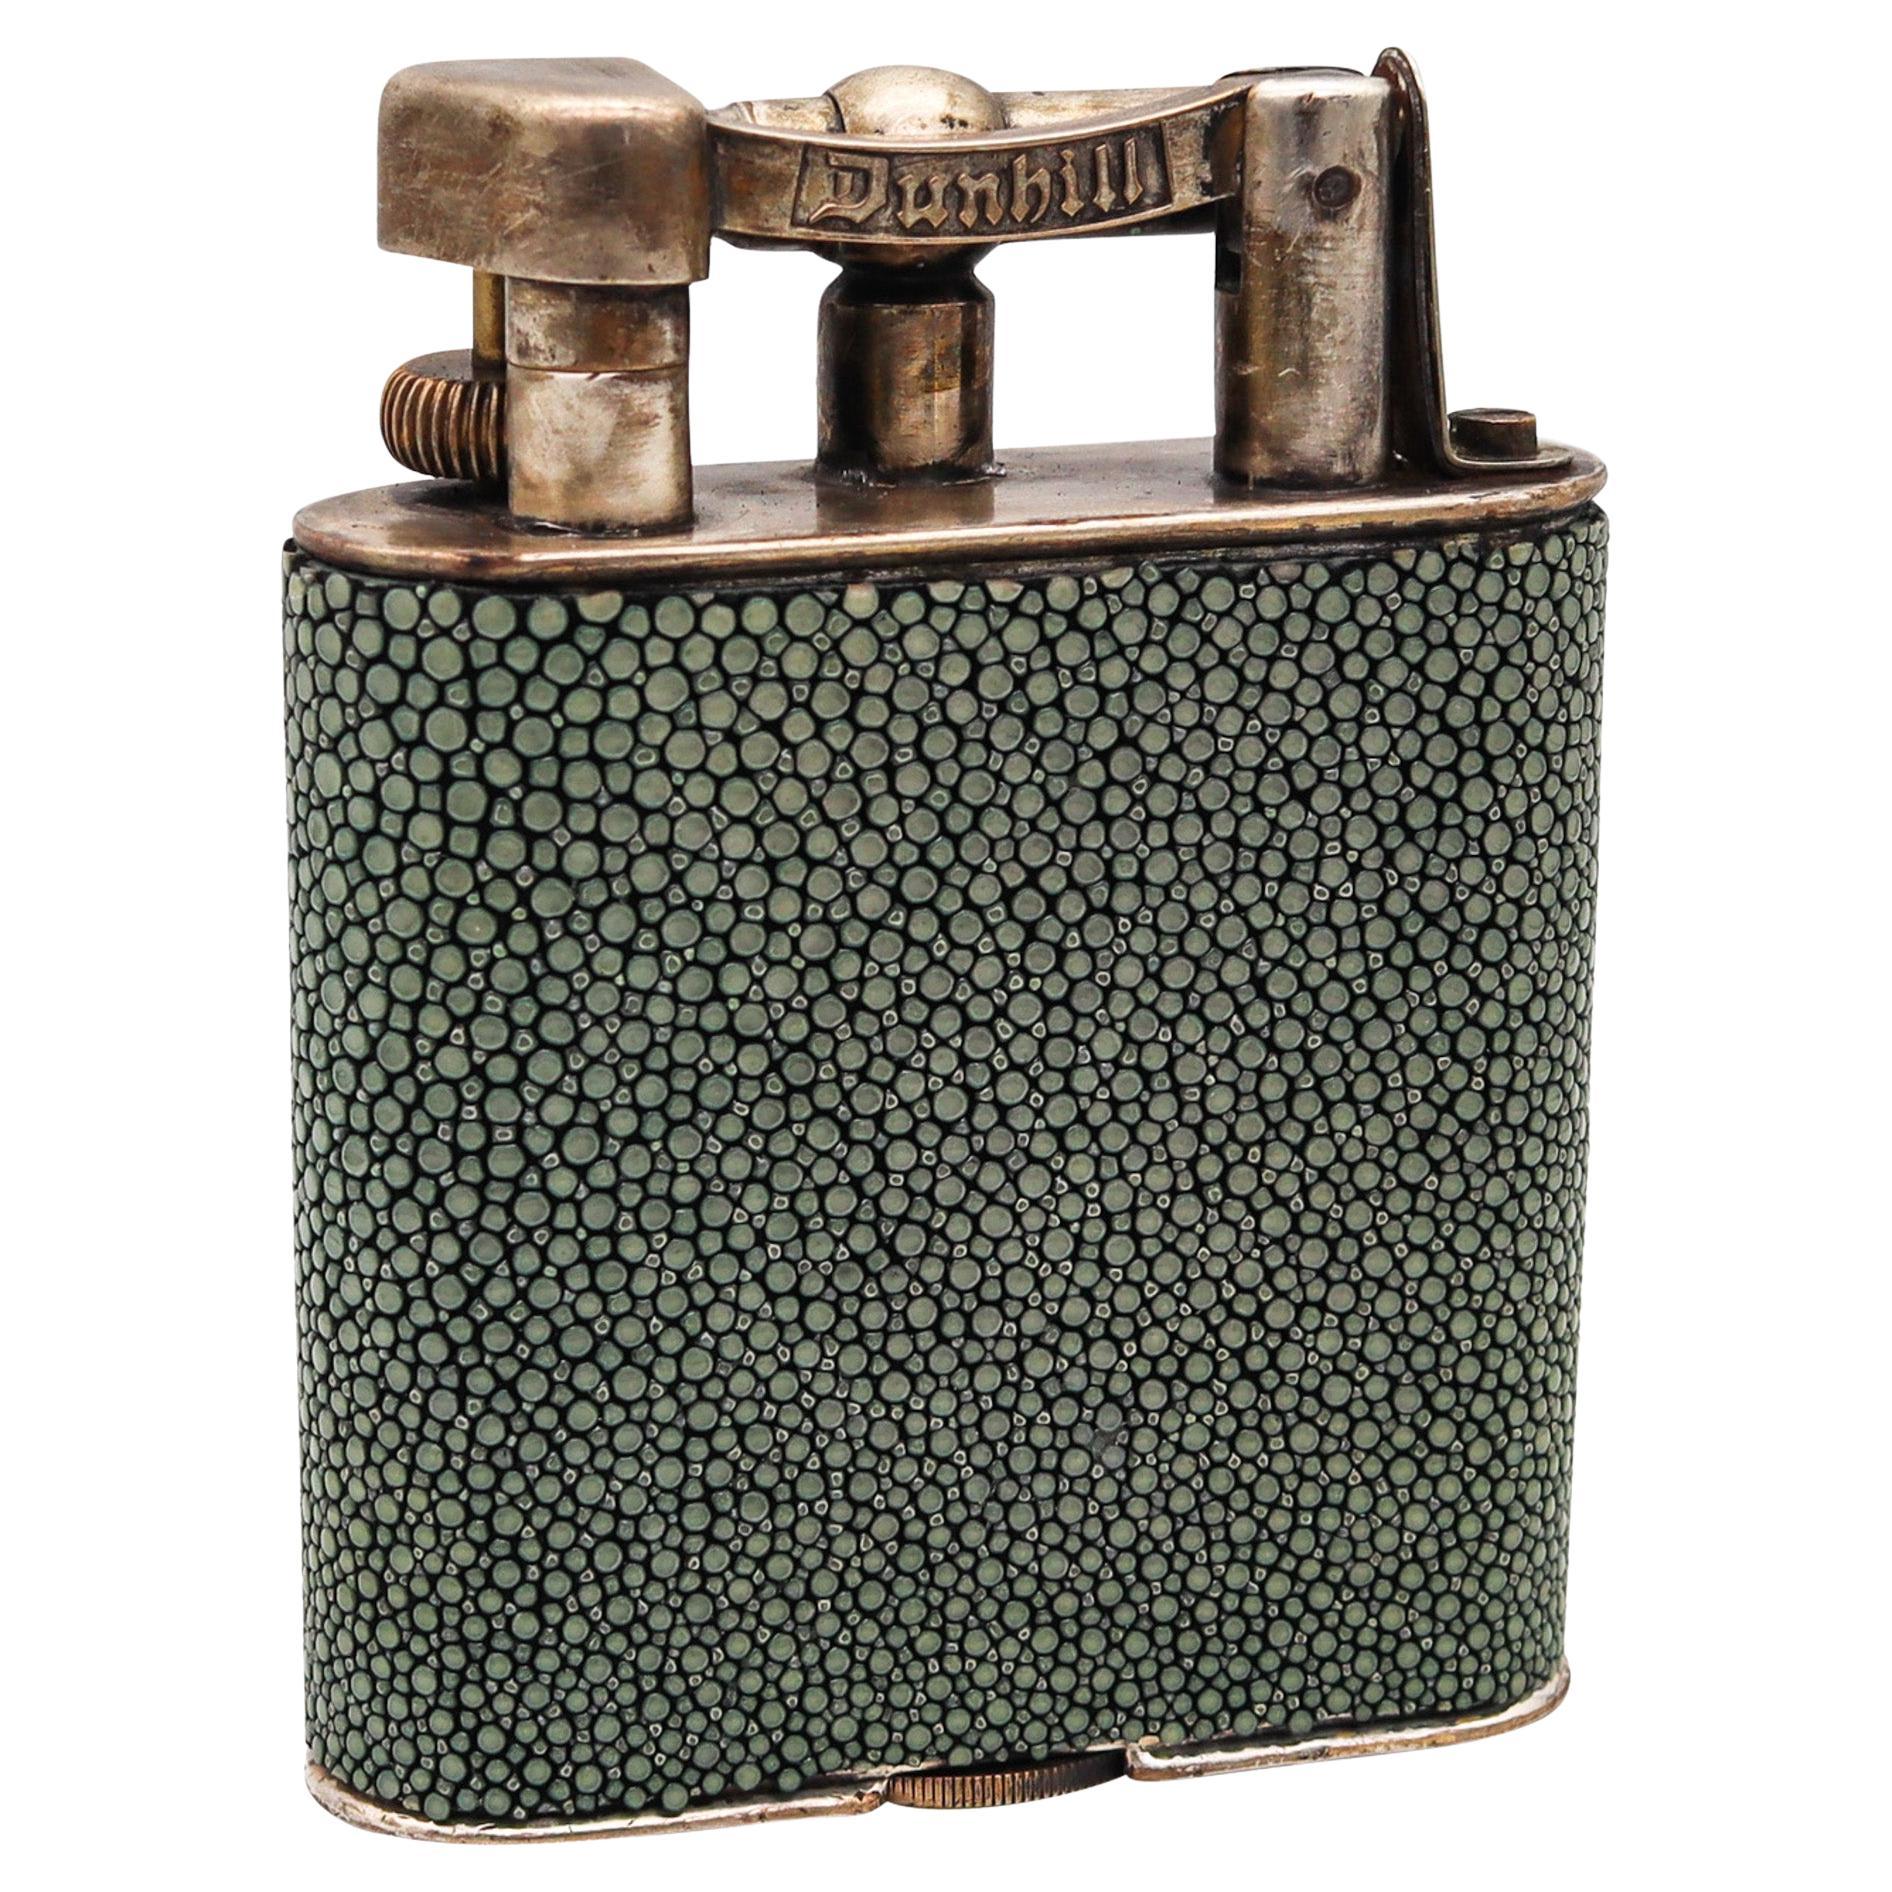 Dunhill England 1940 Desk Table Unique Lift Arm Petrol Lighter with Shagreen For Sale